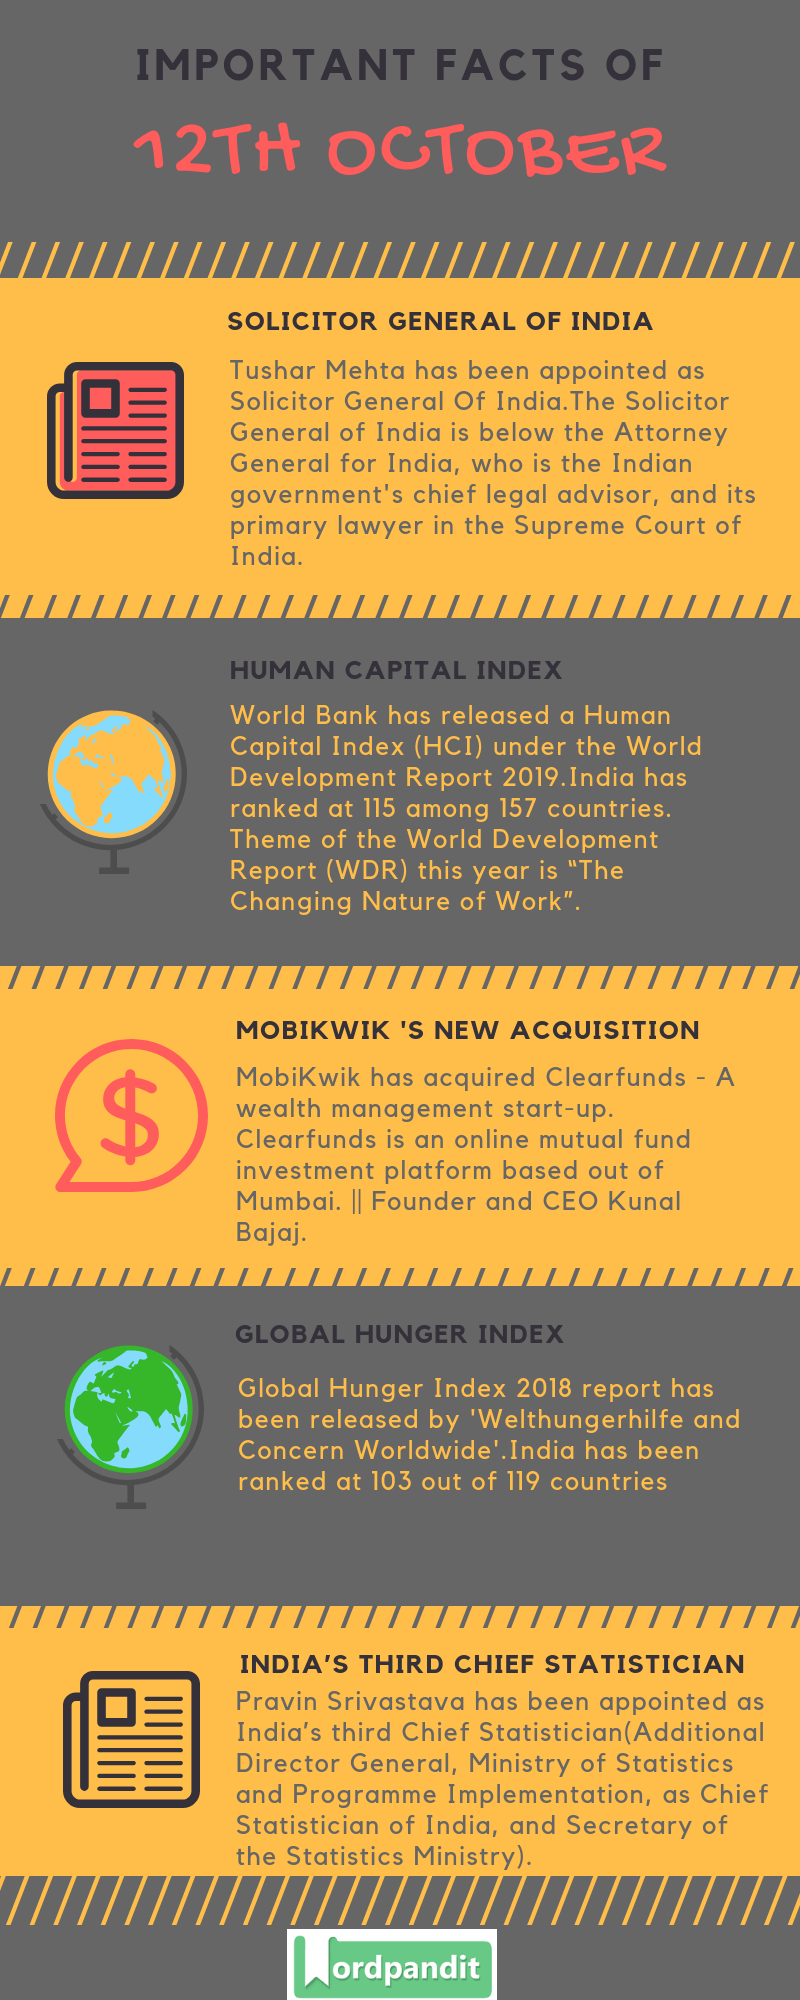 Daily Current Affairs 12 October 2018 Current Affairs Quiz 12 October 2018 Current Affairs Infographic